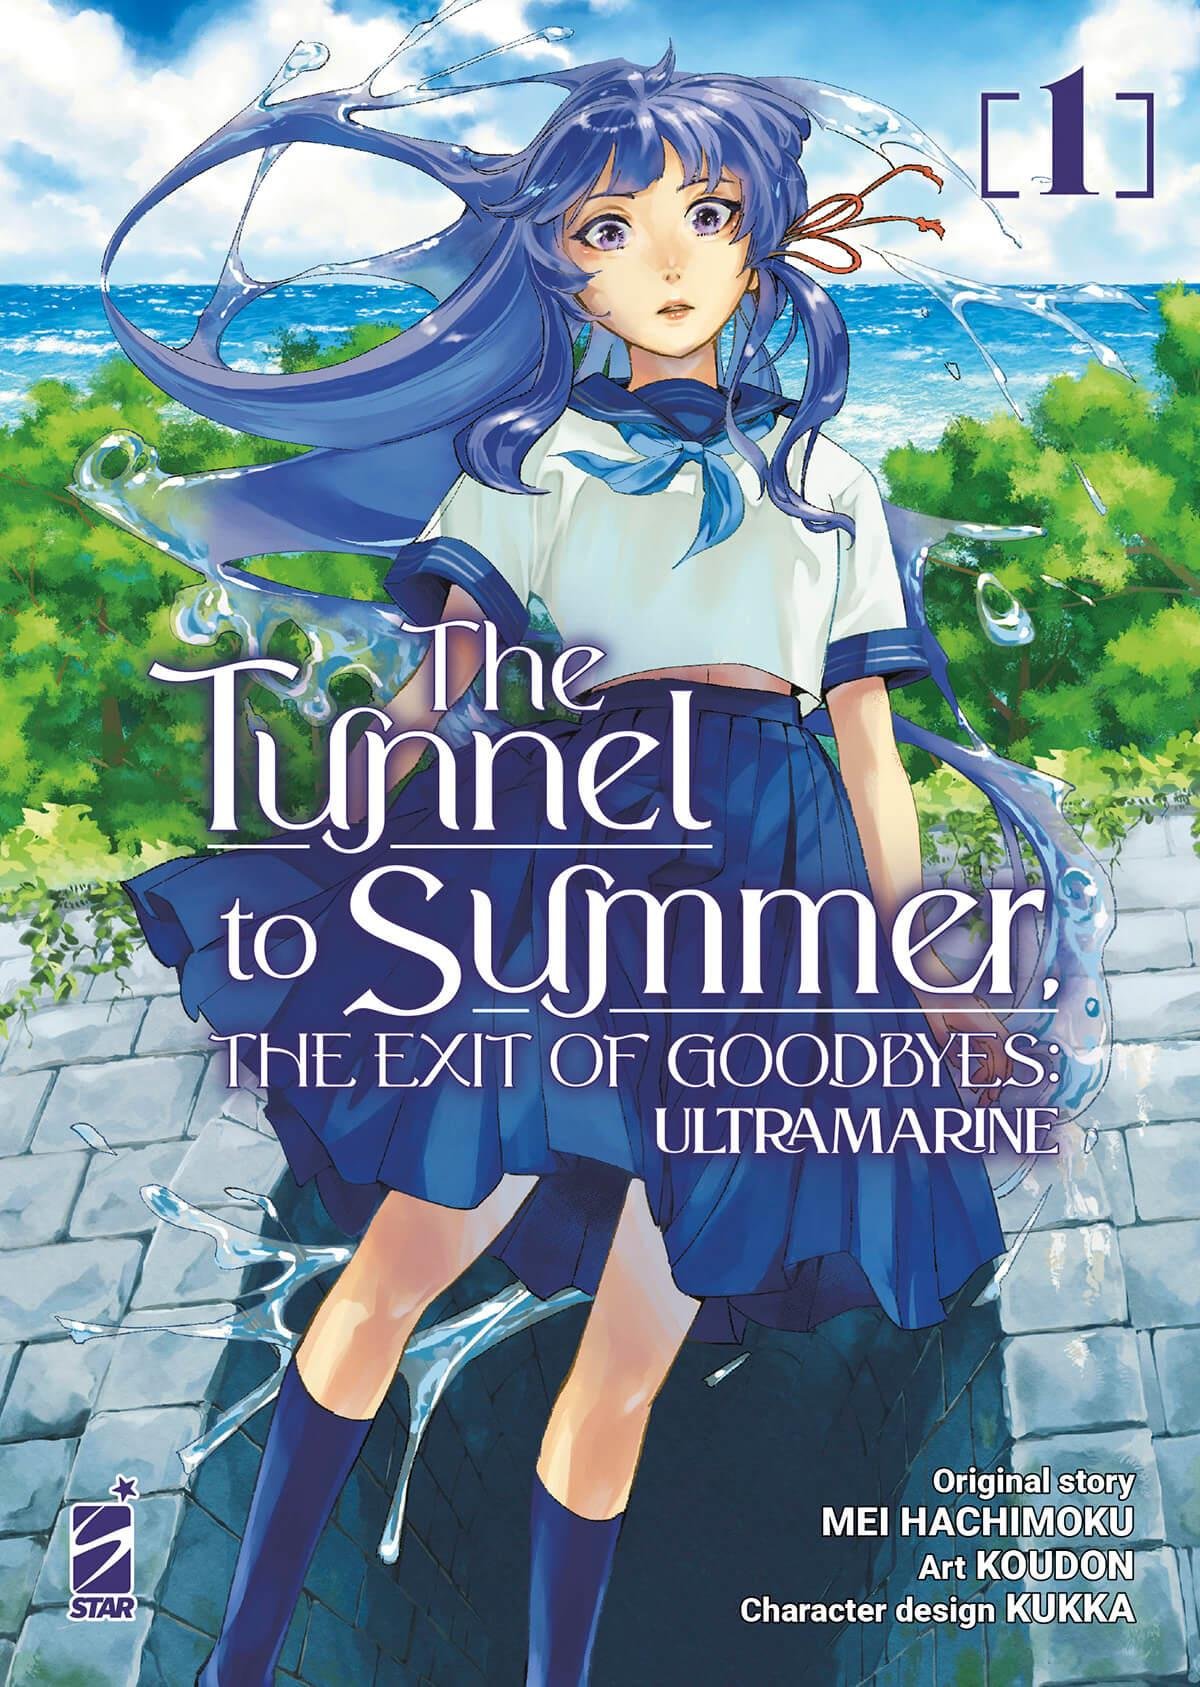 THE TUNNEL TO SUMMER, THE EXIT OF GOODBYES - ULTRAMARINE 1 DI 4 KAPPA EXTRA